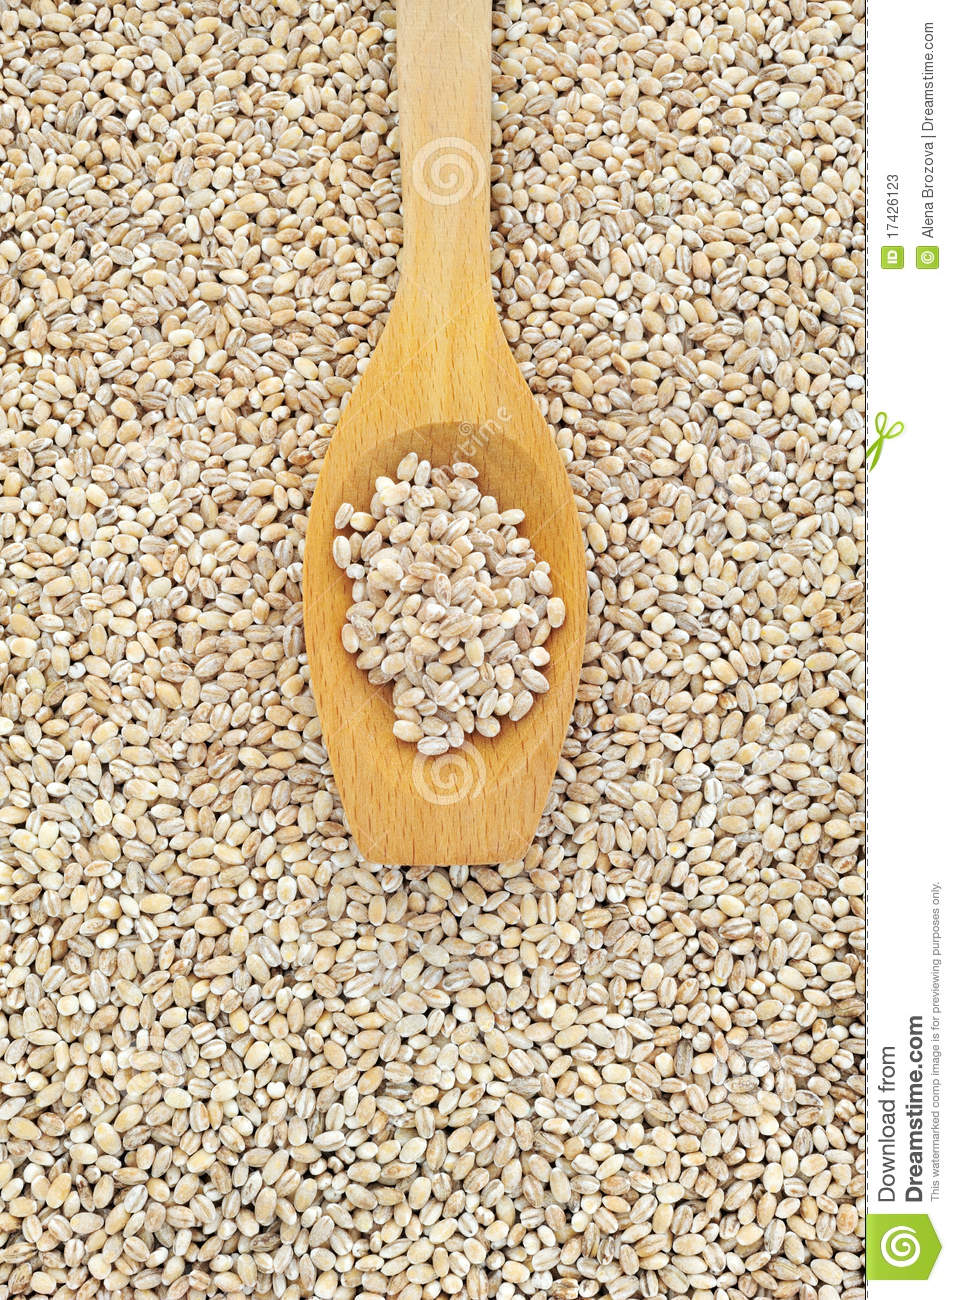 Wooden Spoon And Dried Pearled Barley Stock Photos   Image  17426123